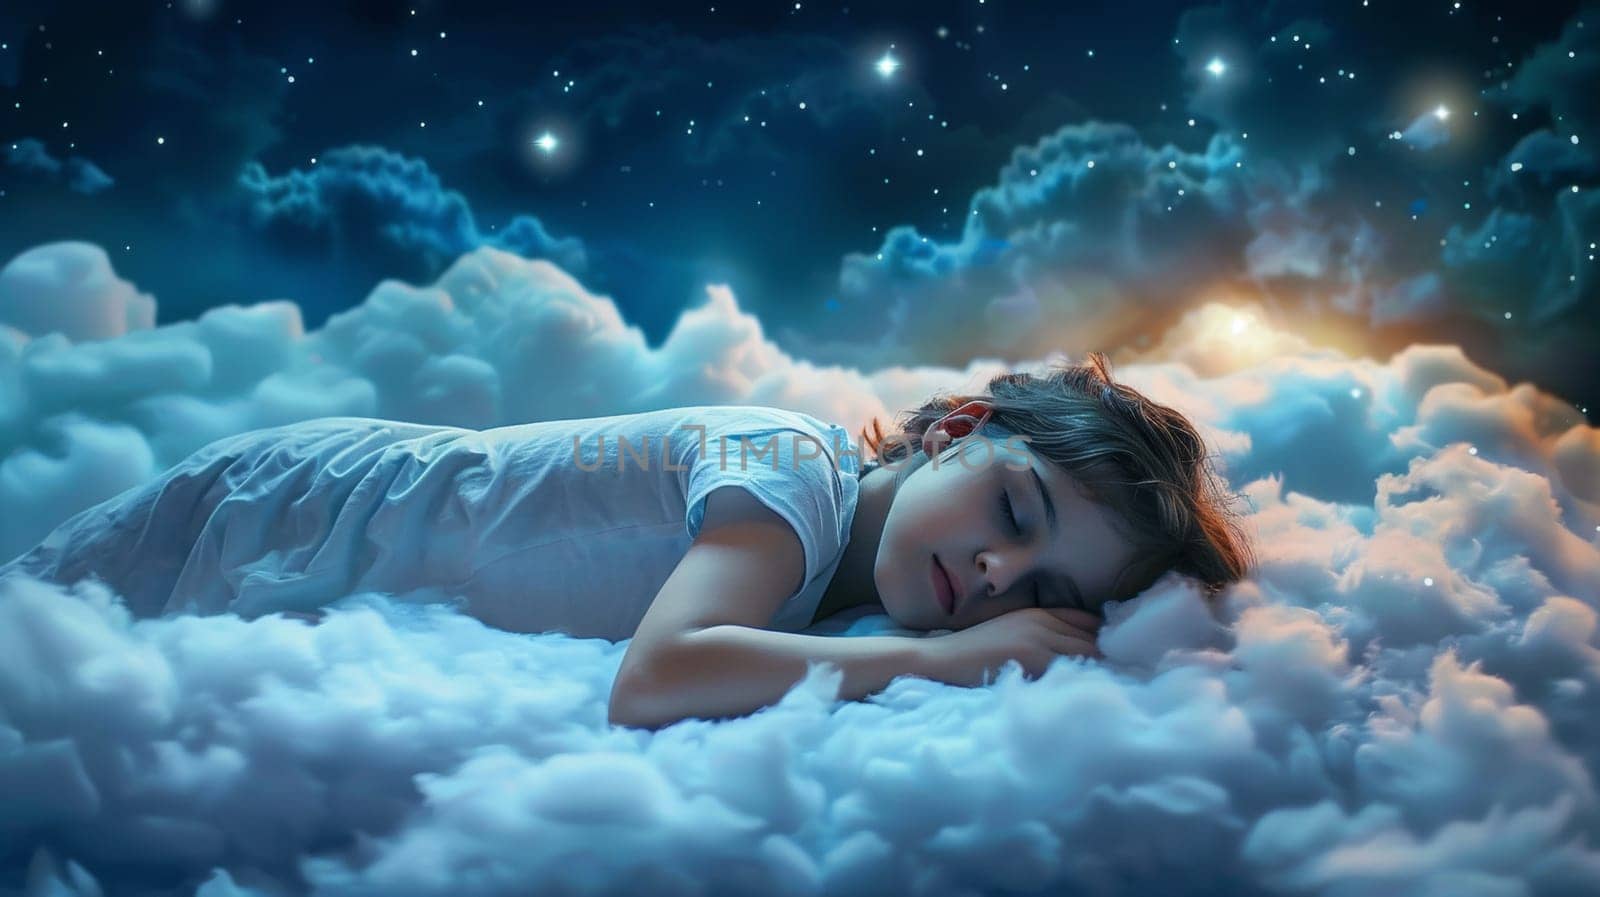 A young girl sleeping on a cloud with stars in the sky